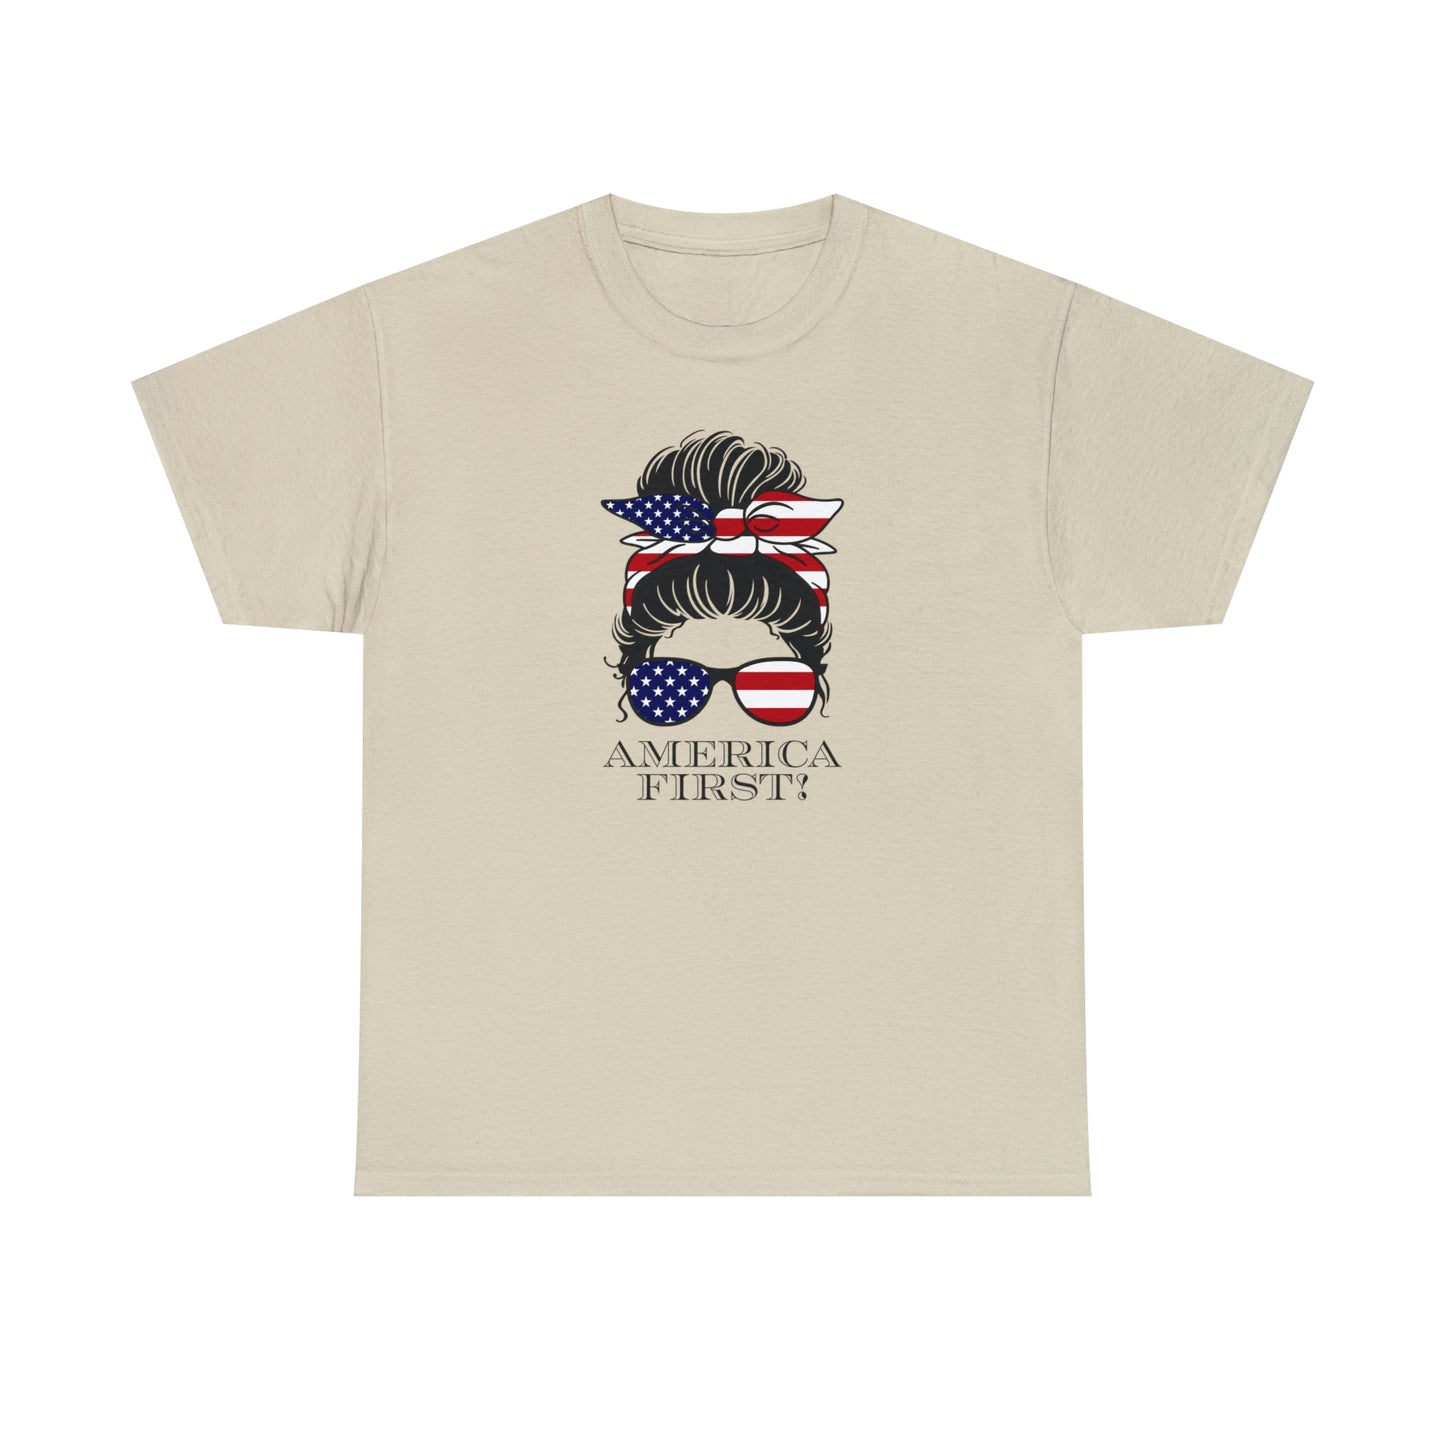 America First Patriotic T-Shirt For Female Patriot Tshirt Conservative Shirts Patriotic T Shirt Conservative Gifts For Patriotic Women